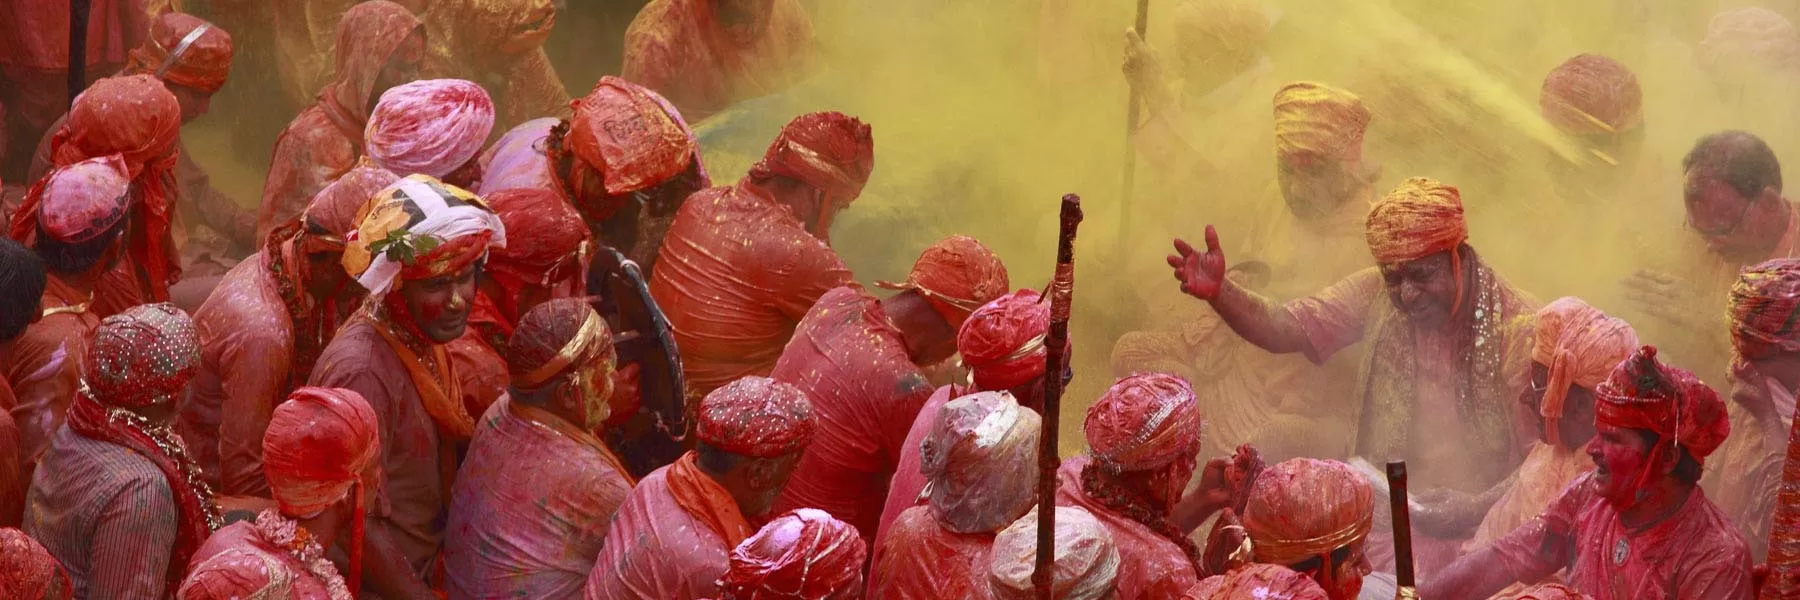 10 places to experience holi in India